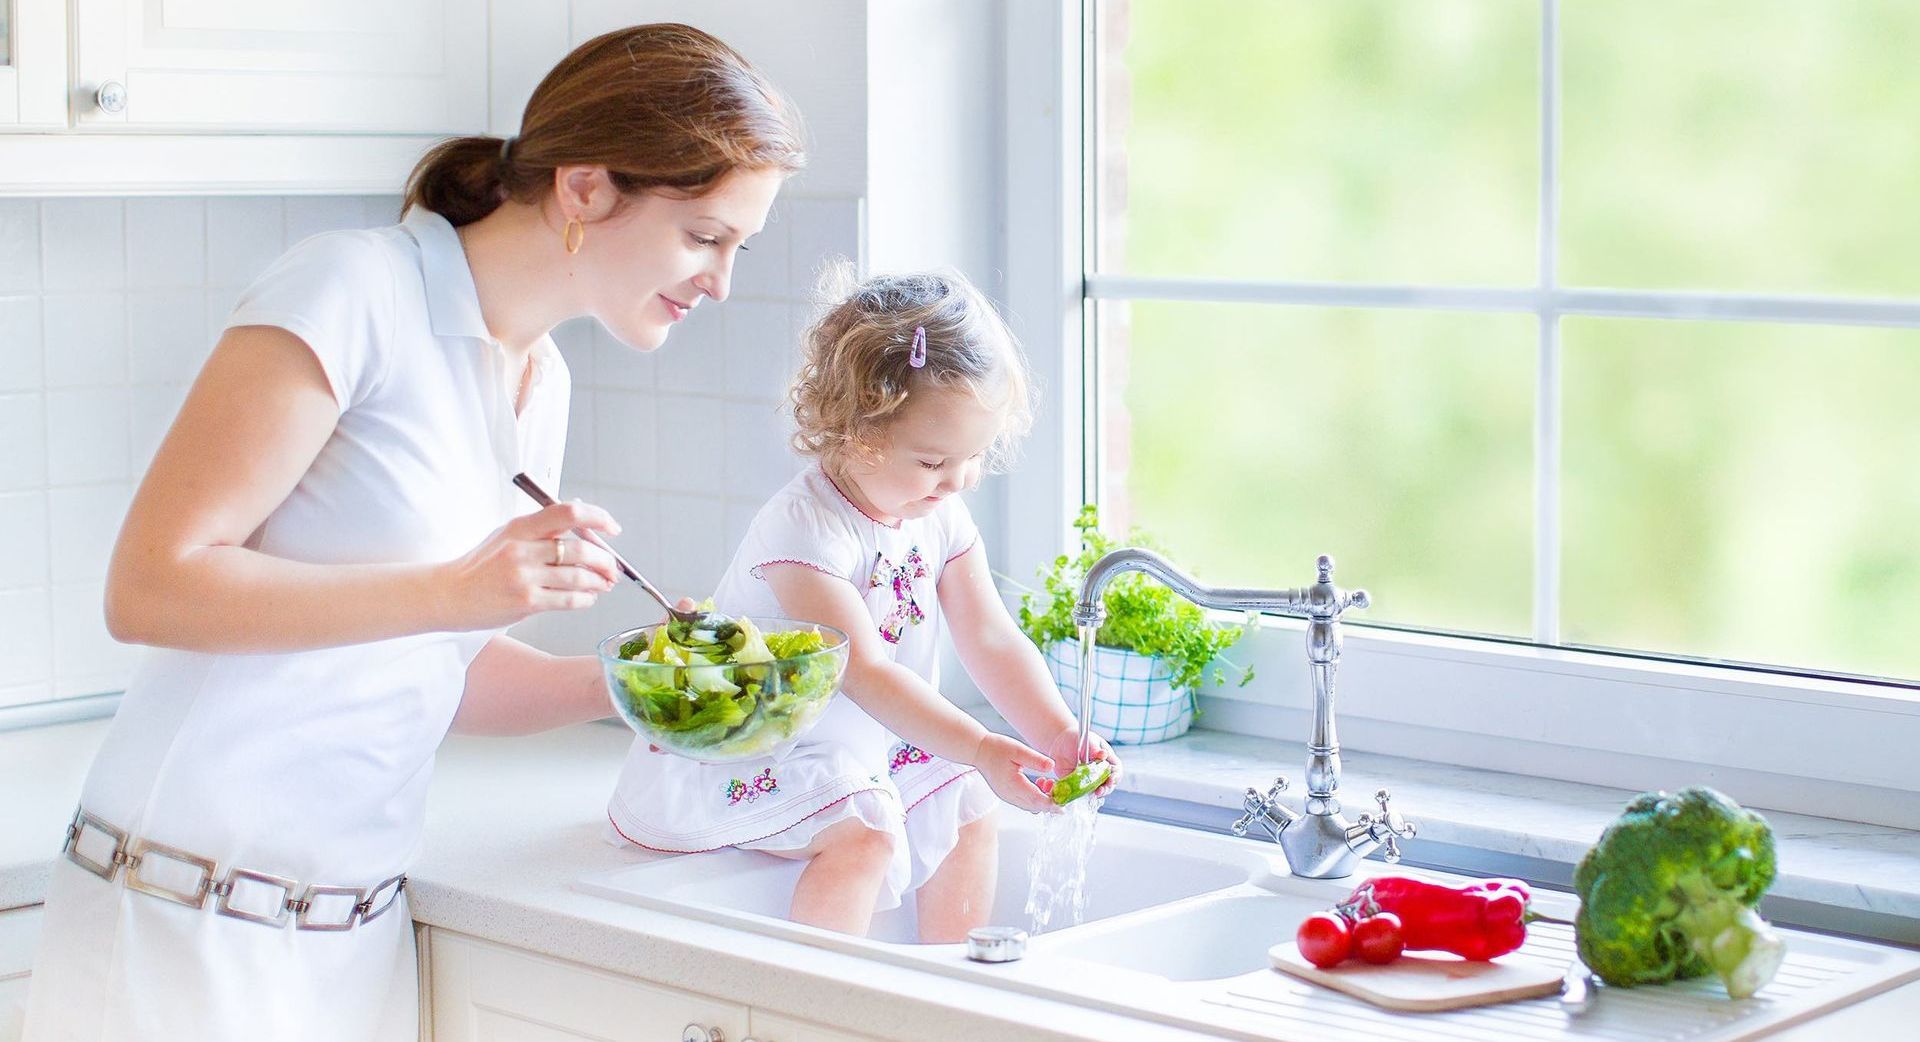 The Water Well Drilling Process: What Homeowners Need to Know
Mom with Child enjoying cleaning vegetables with flowing water in the kitchen sink